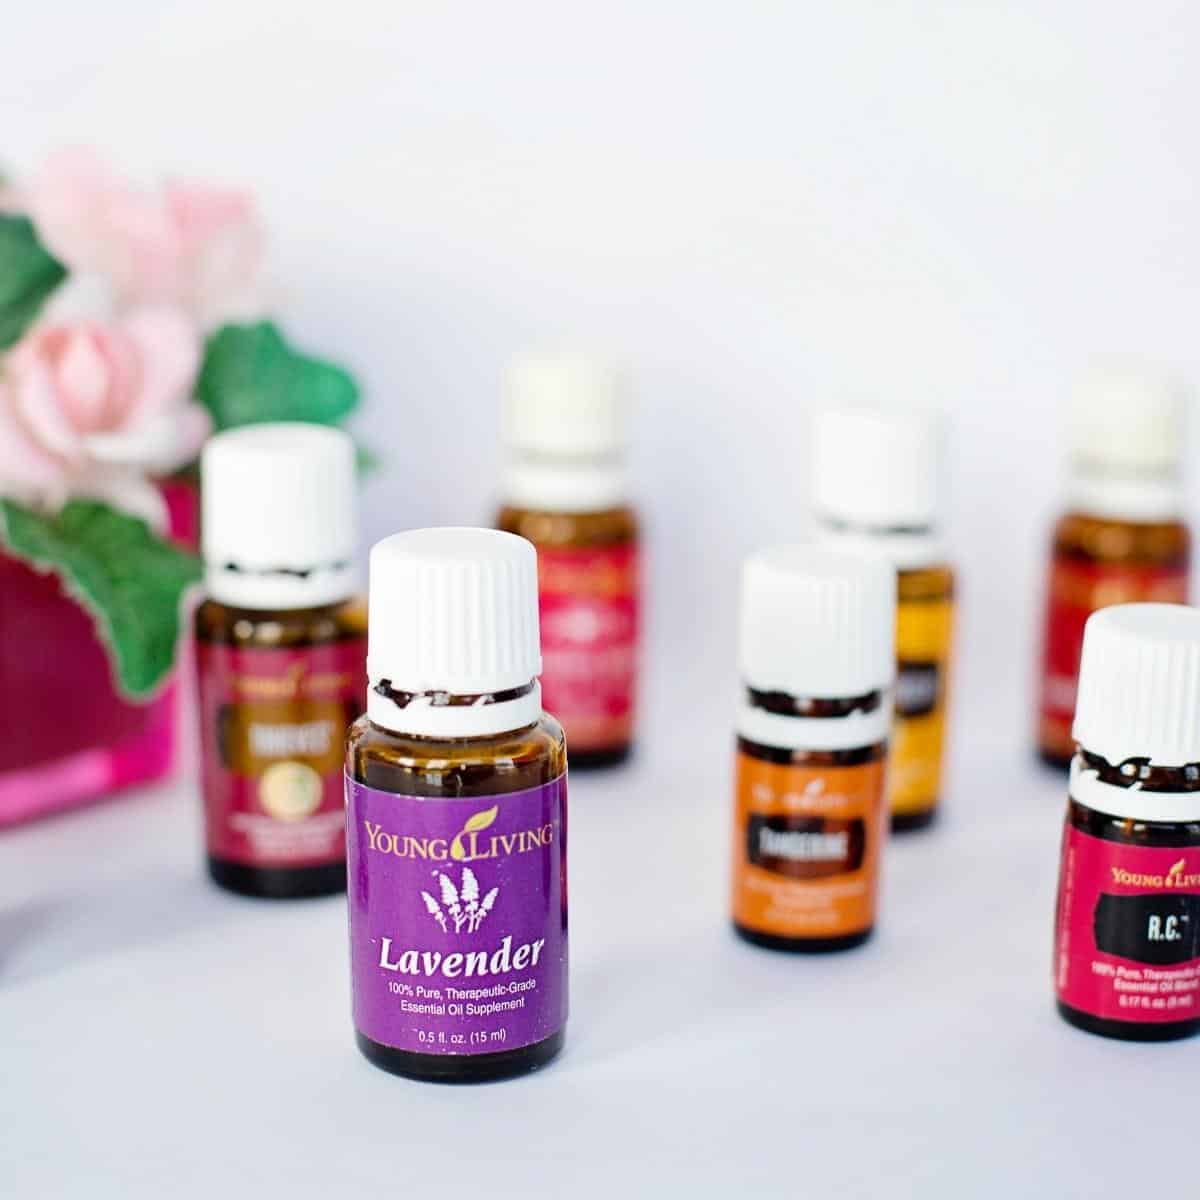 Essential oils and your everyday life